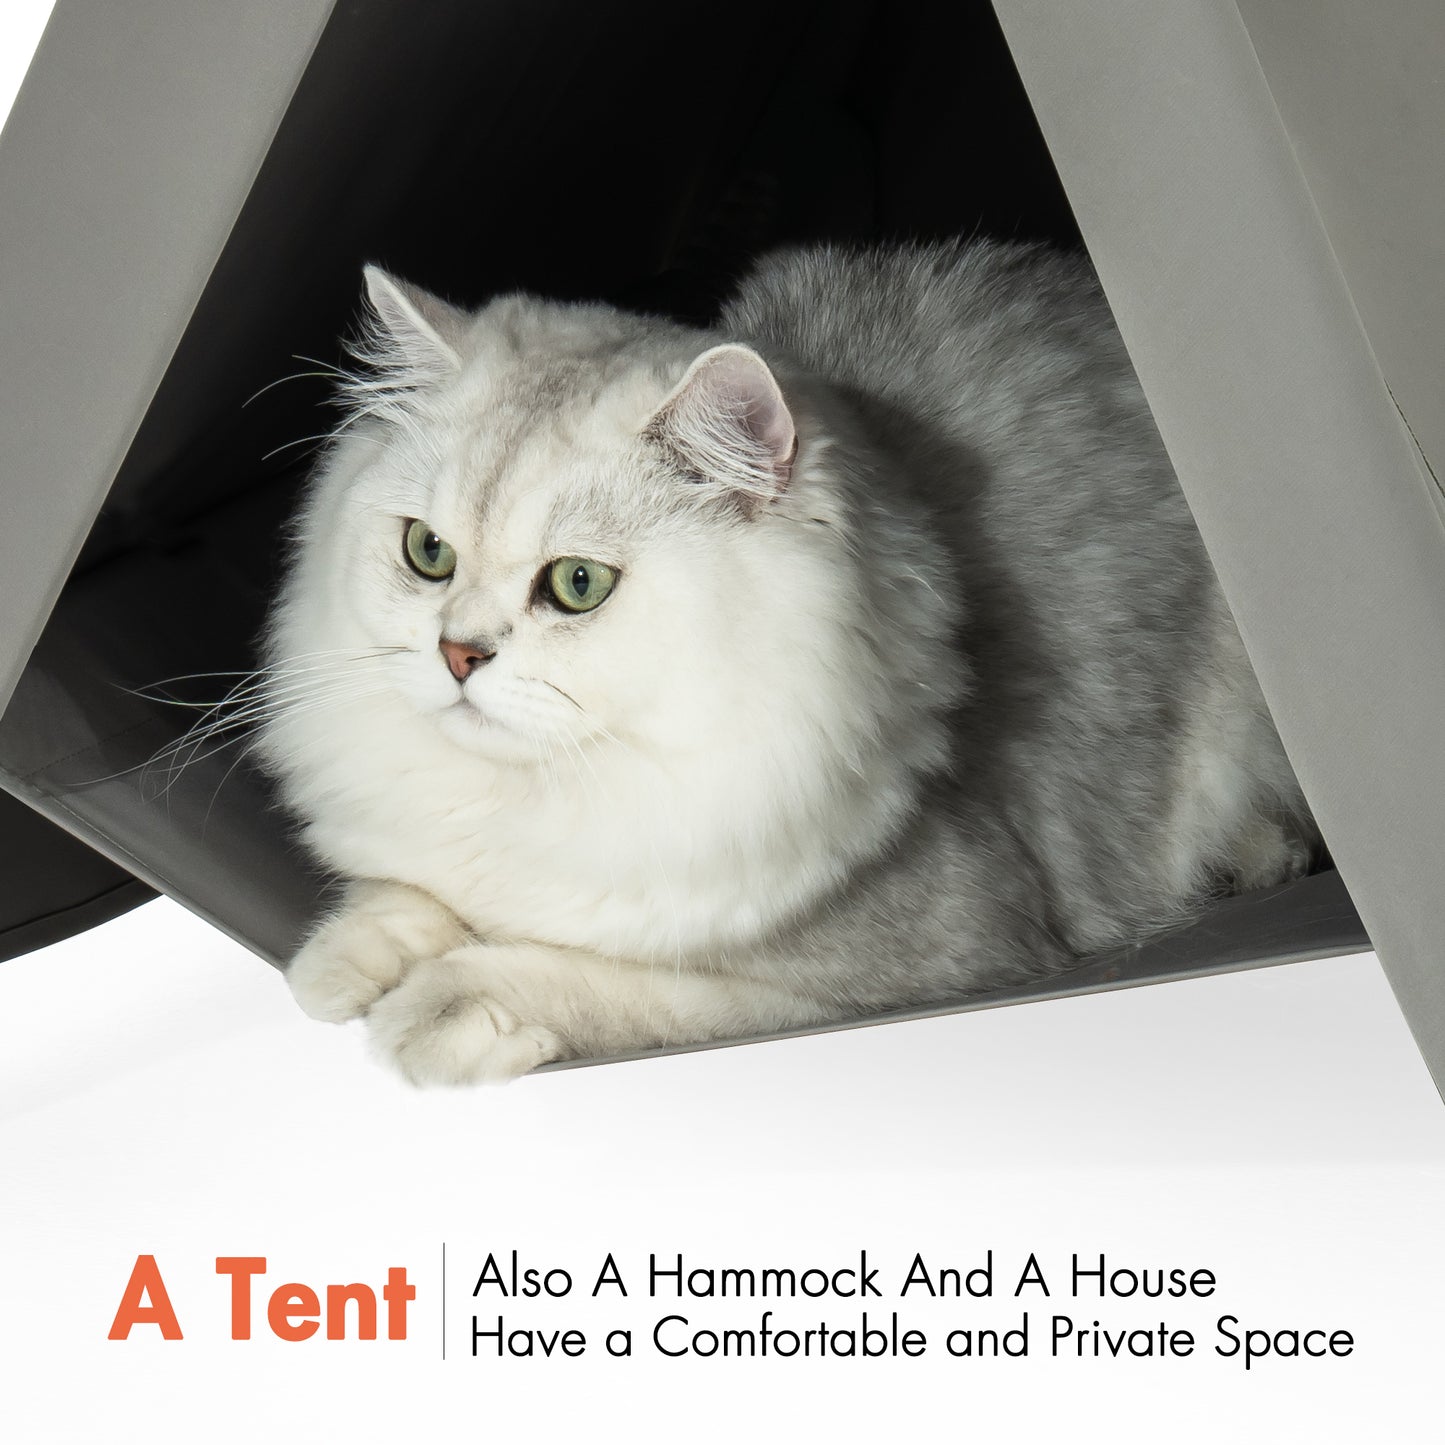 Pet Tent, Cat Tent for Indoor Cats, Wooden Cat House for small Pets,Gray green